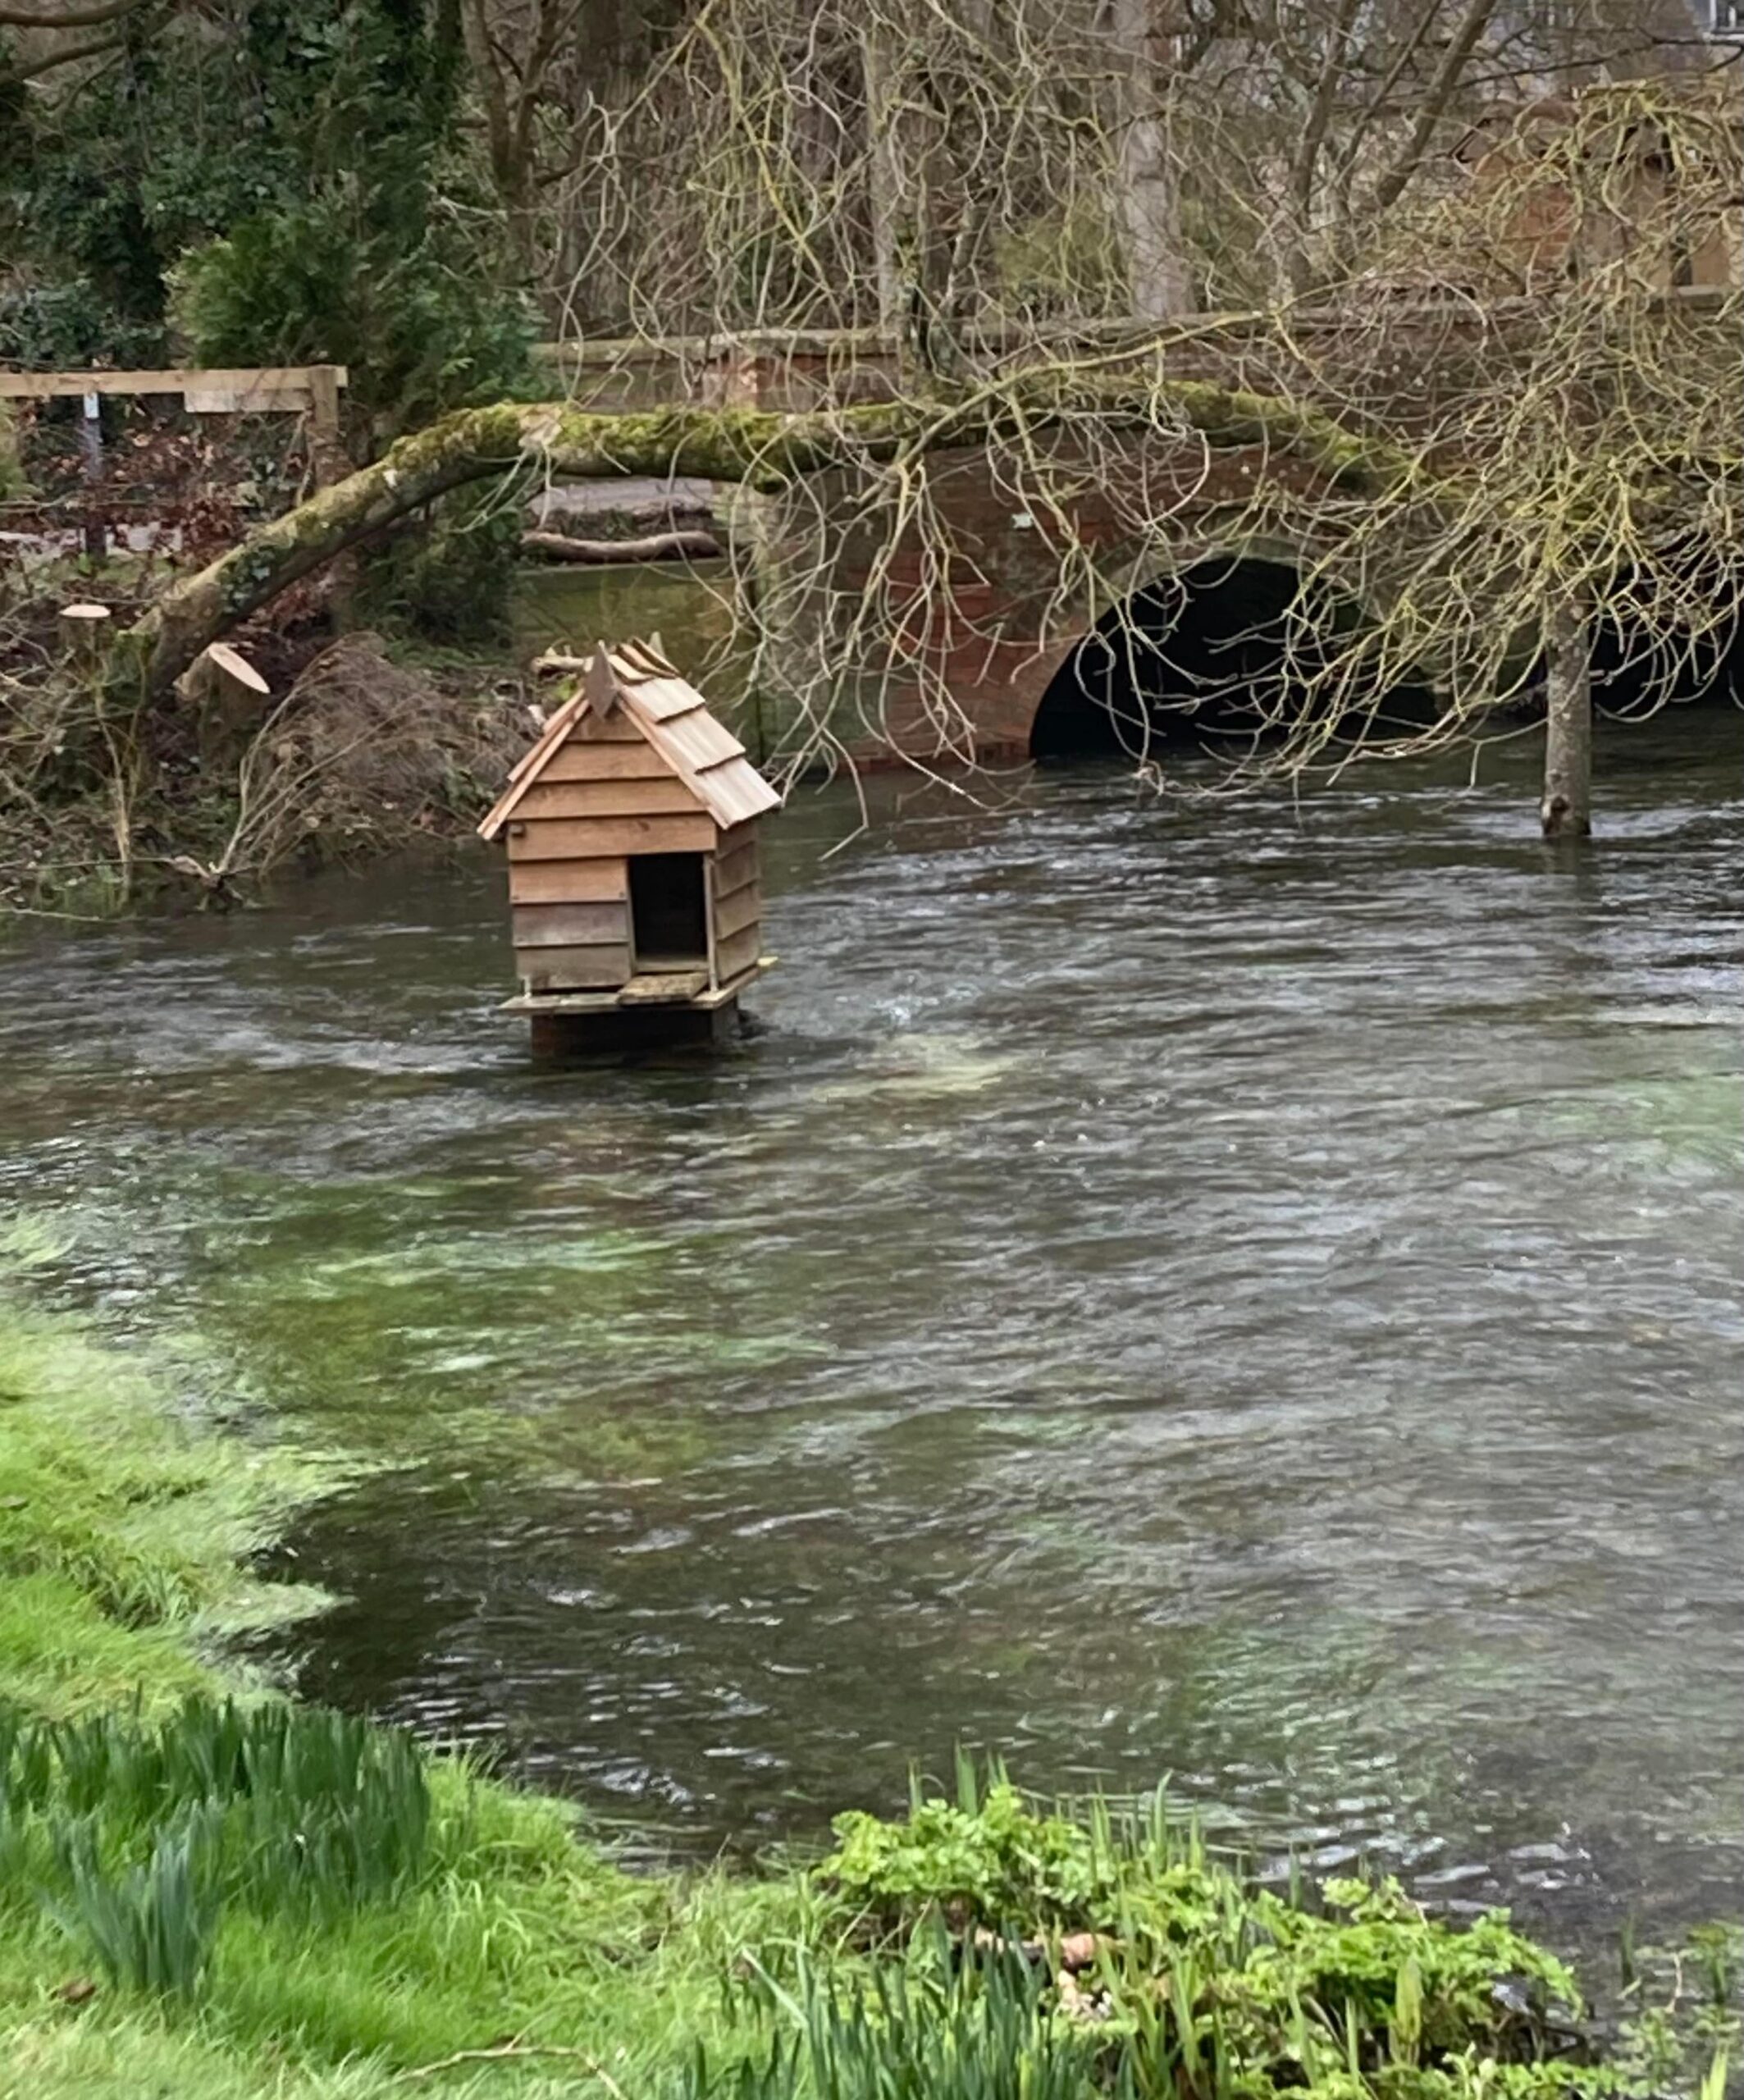 Peter's duck house back in the river.